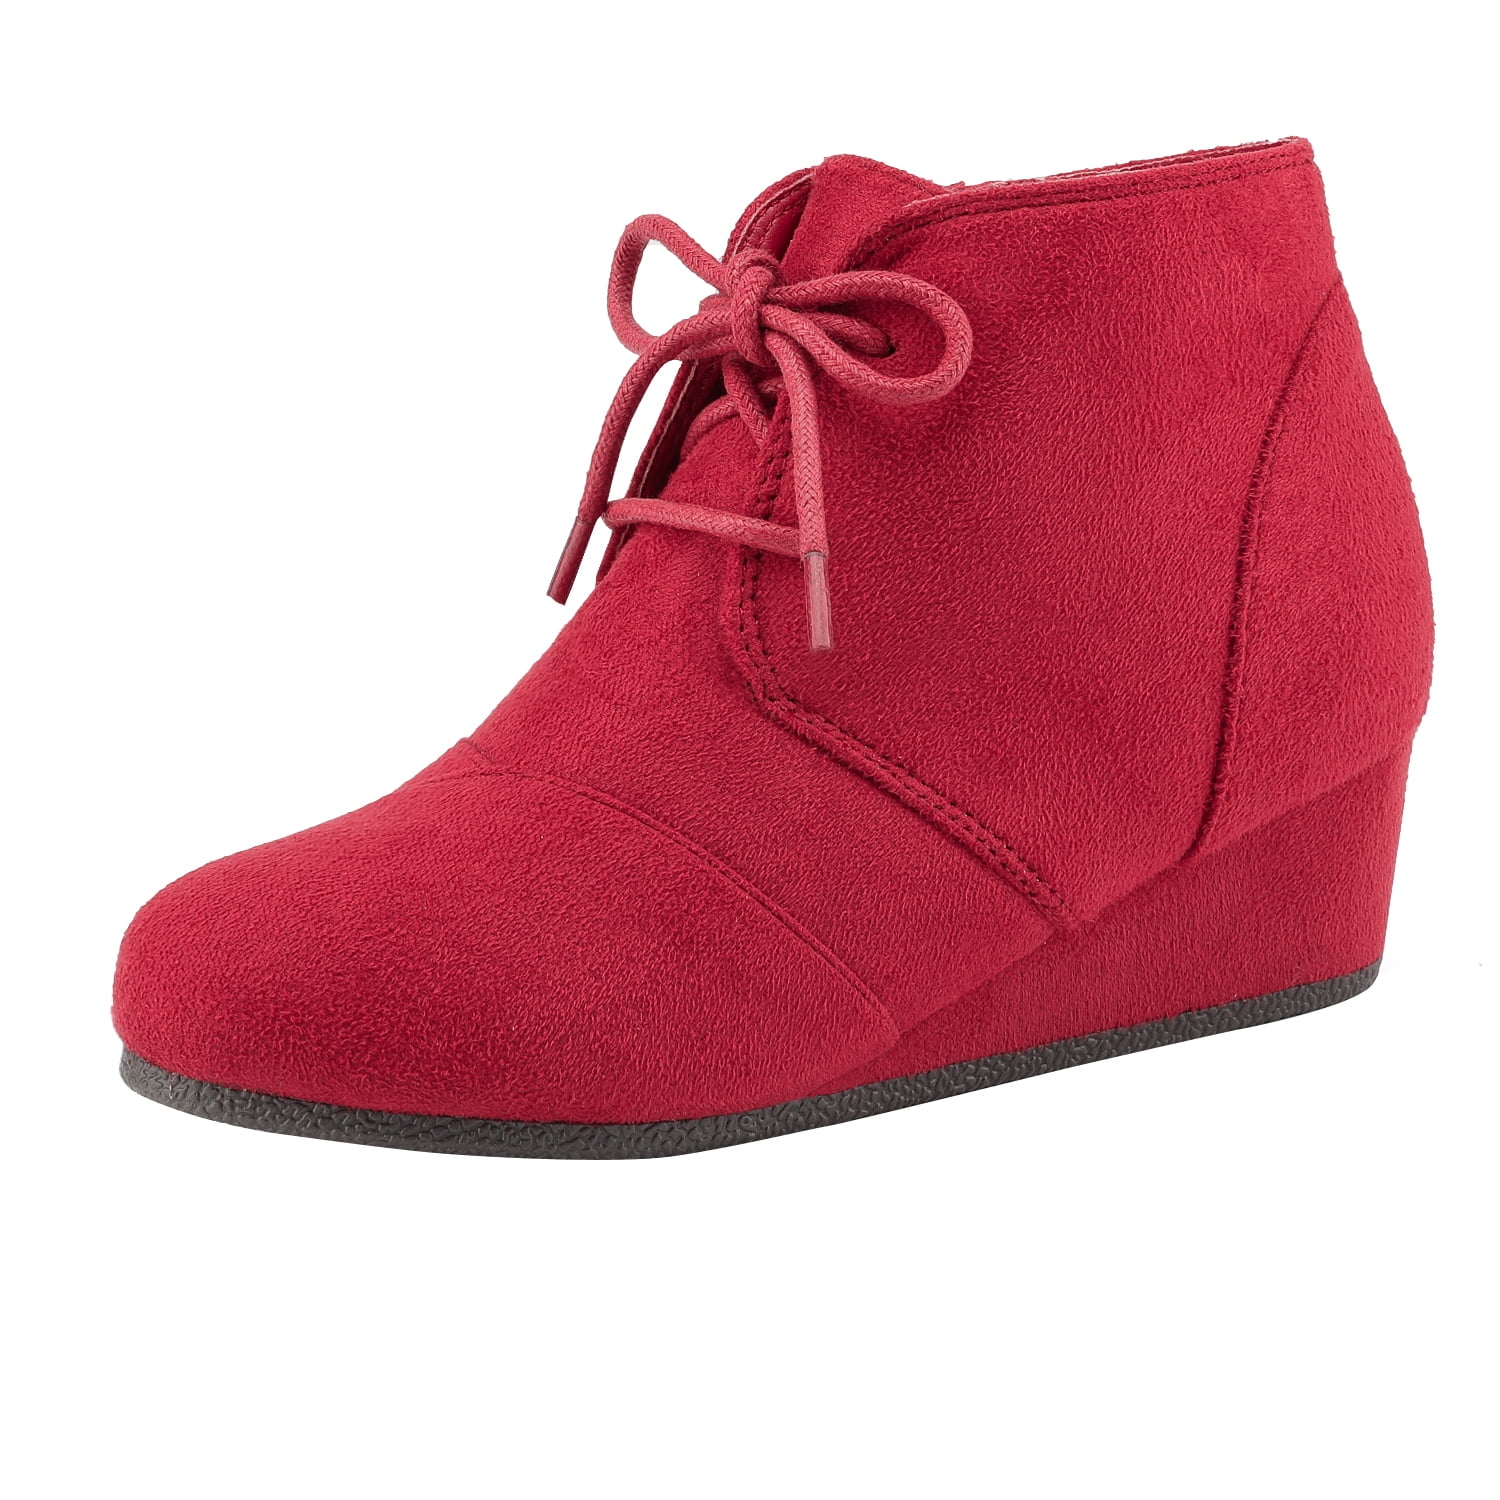 DREAM PAIRS Kids Boys Girls Side Zipper Ankle Boots